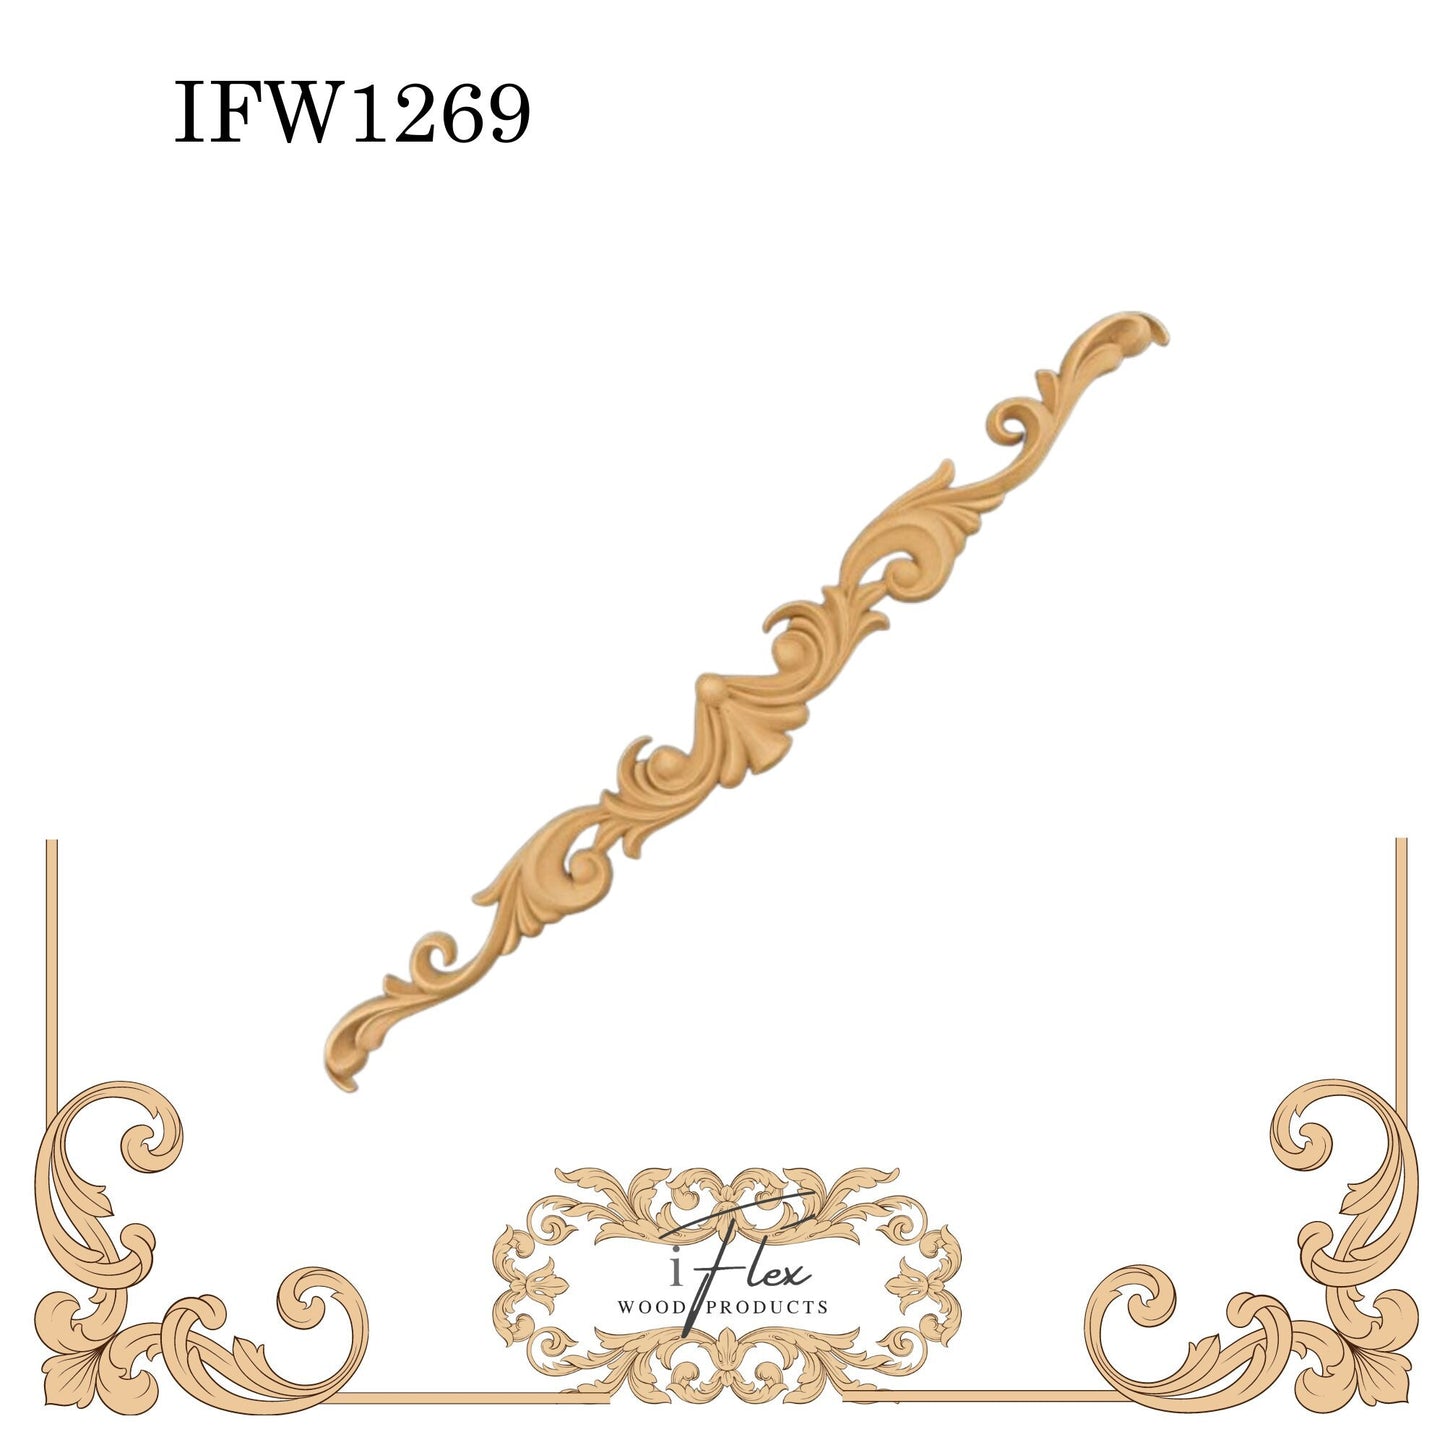 IFW 1269 iFlex Wood Products, bendable mouldings, flexible, wooden appliques, pediment